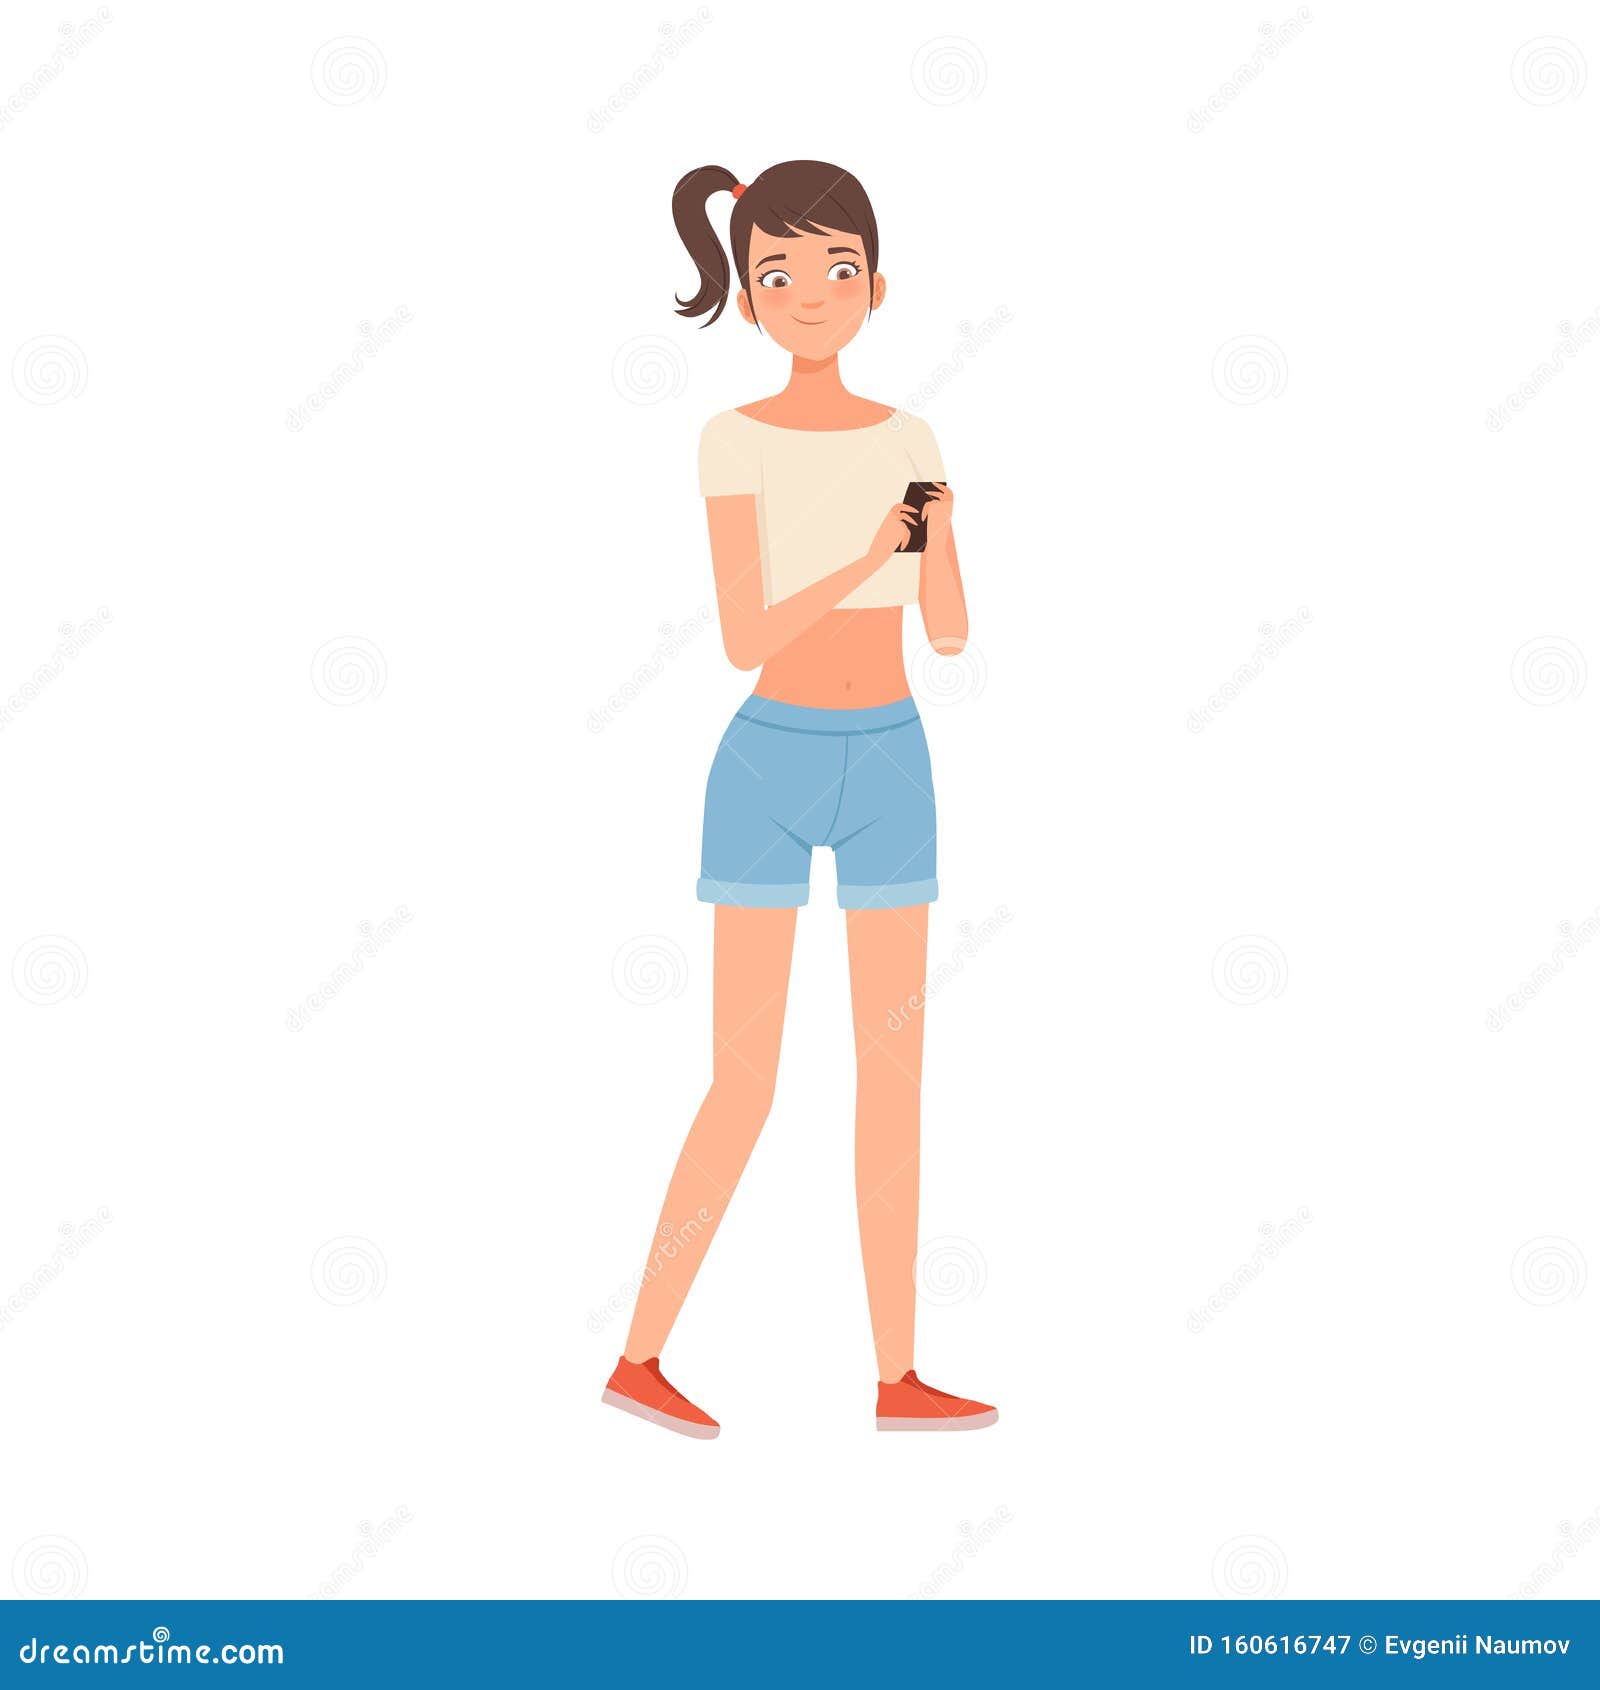 Teenager with Phone Character Illustration Vector on a White Background ...